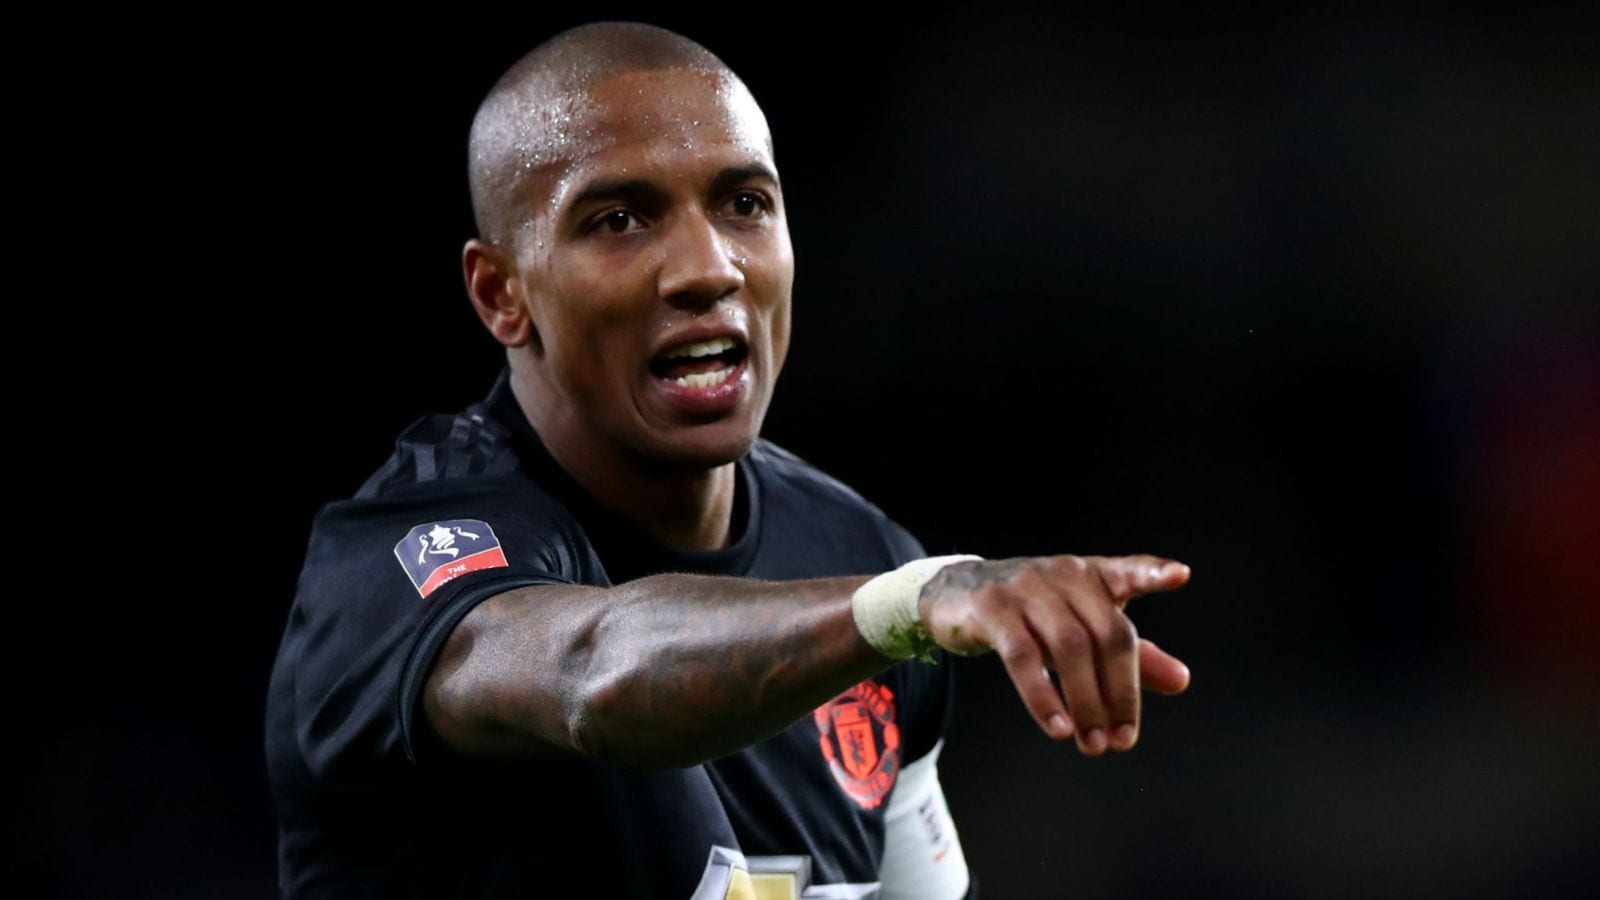 Ashley Young: Inter Milan in talks with Manchester United over signing